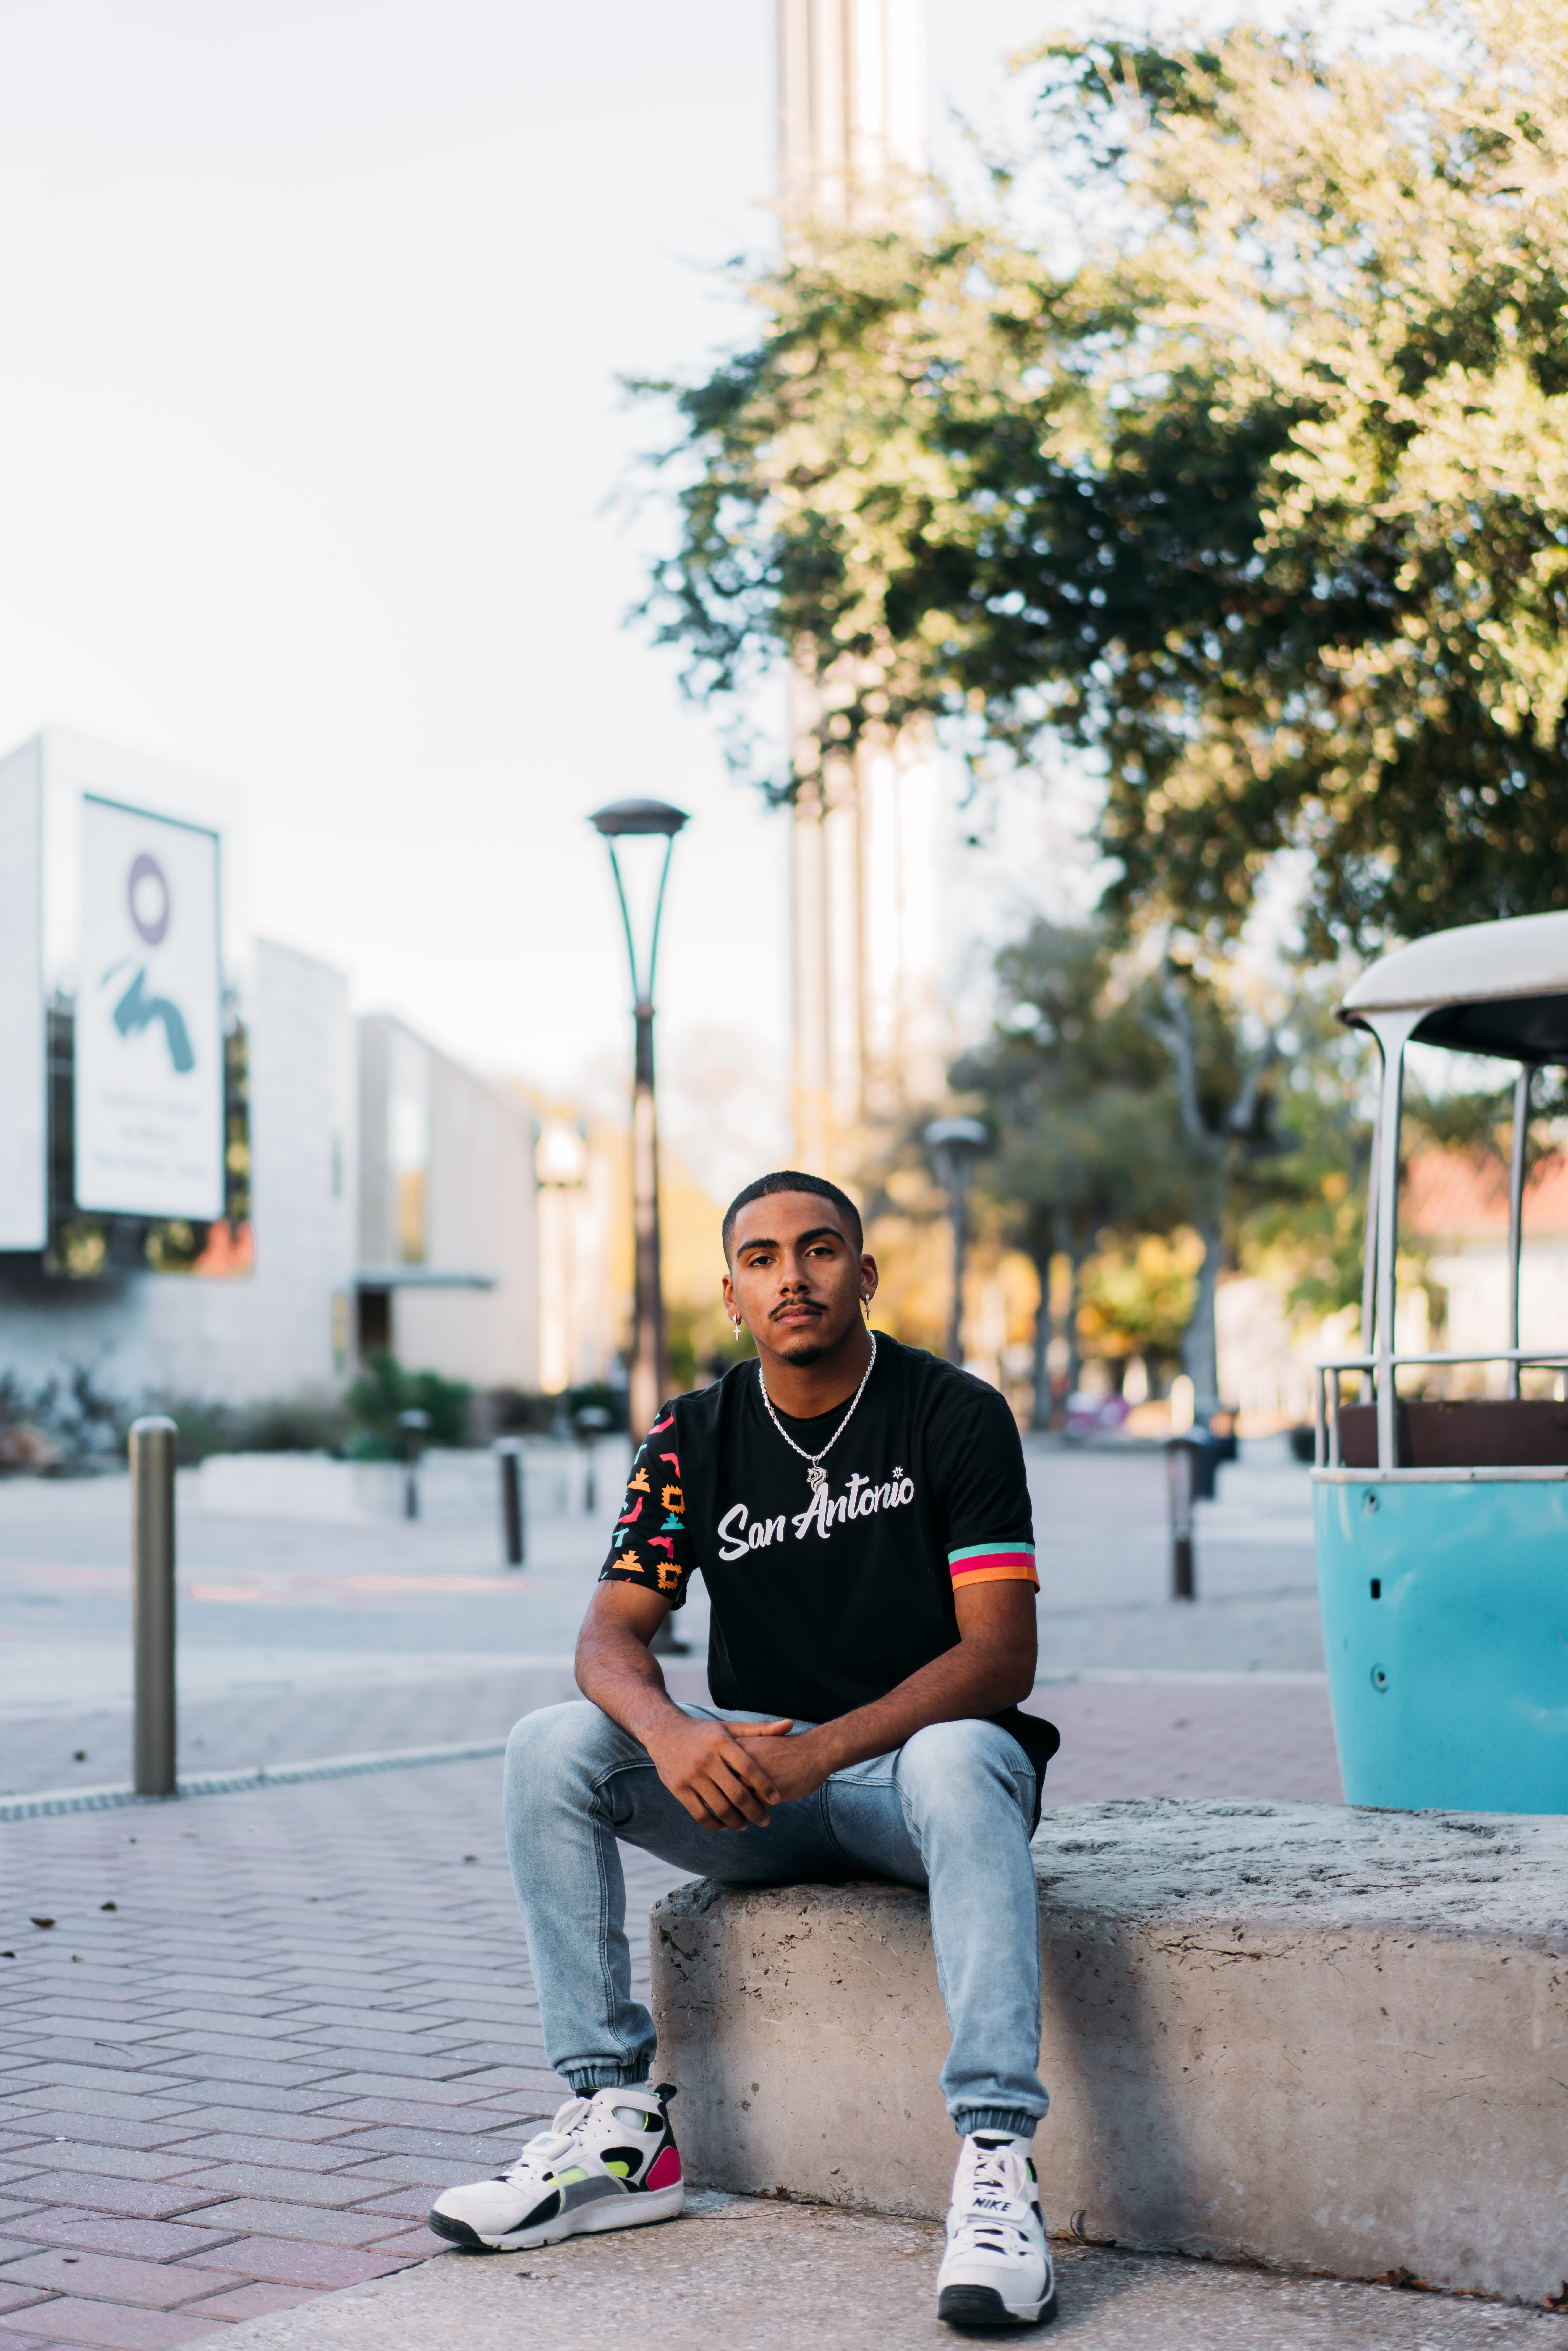 San Antonio Spurs announce La Cultura clothing line inspired by